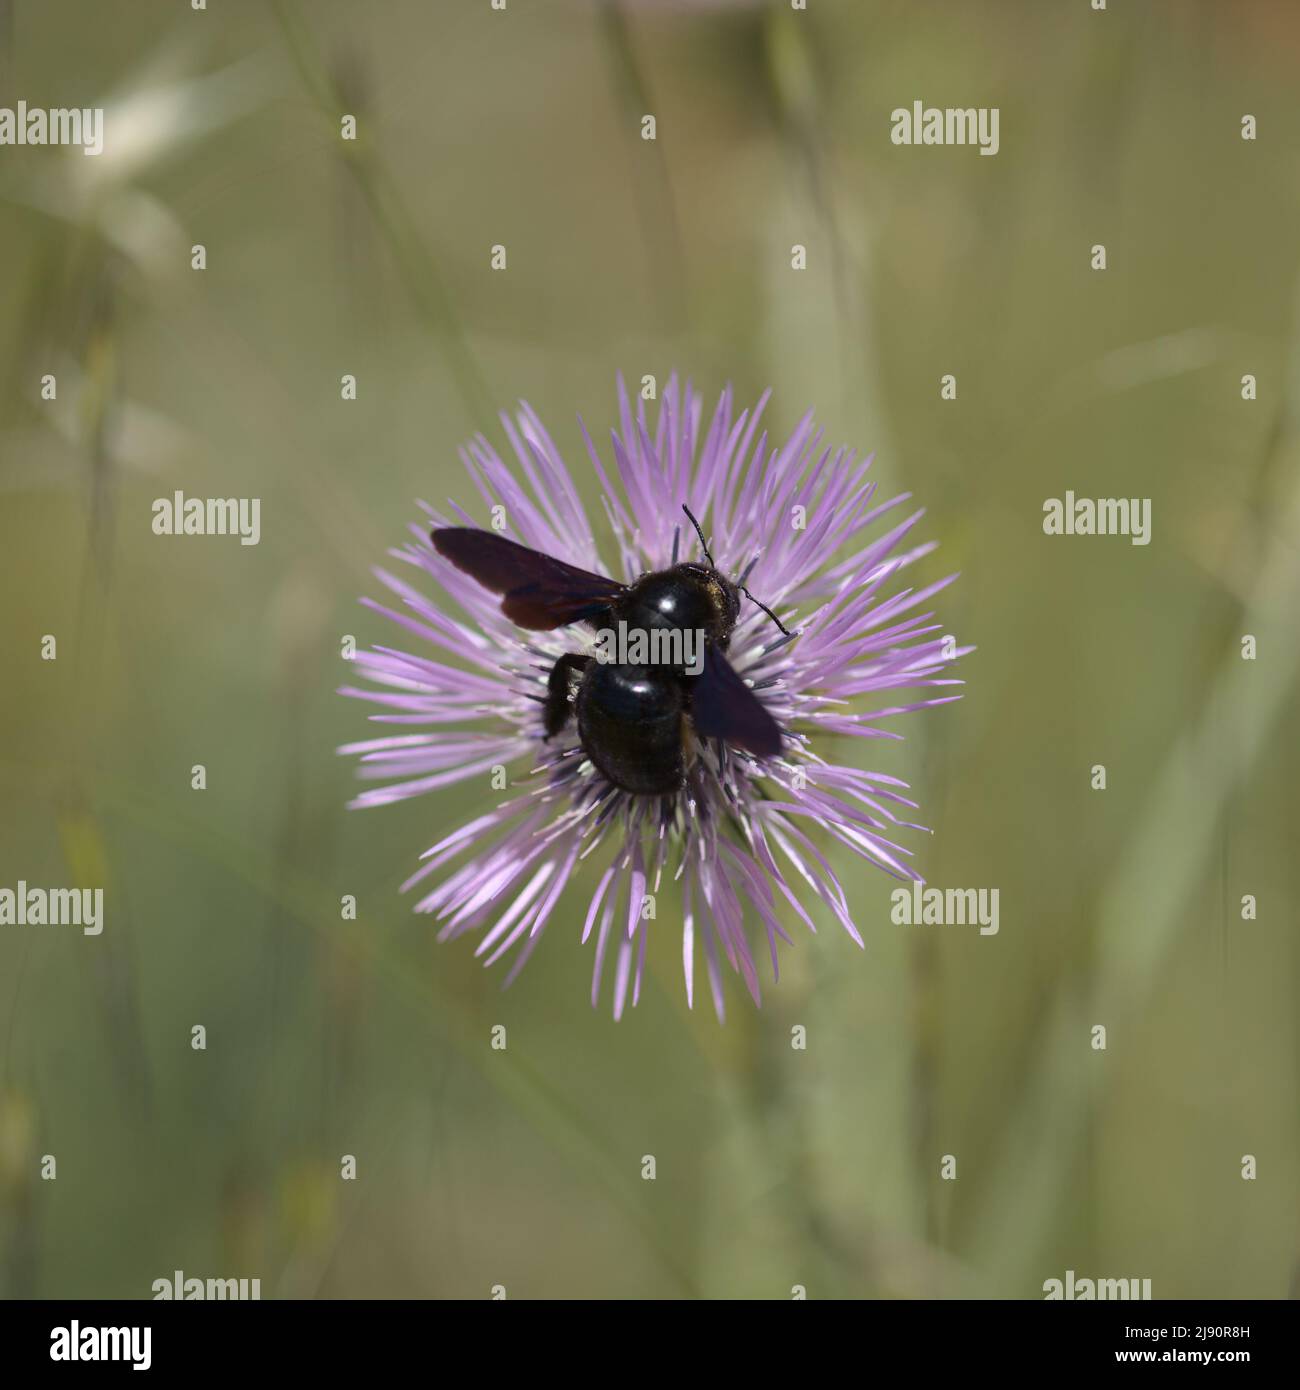 Fauna of Gran Canaria -  Xylocopa violacea, the violet carpenter bee, on a thistle flower, natural macro background Stock Photo